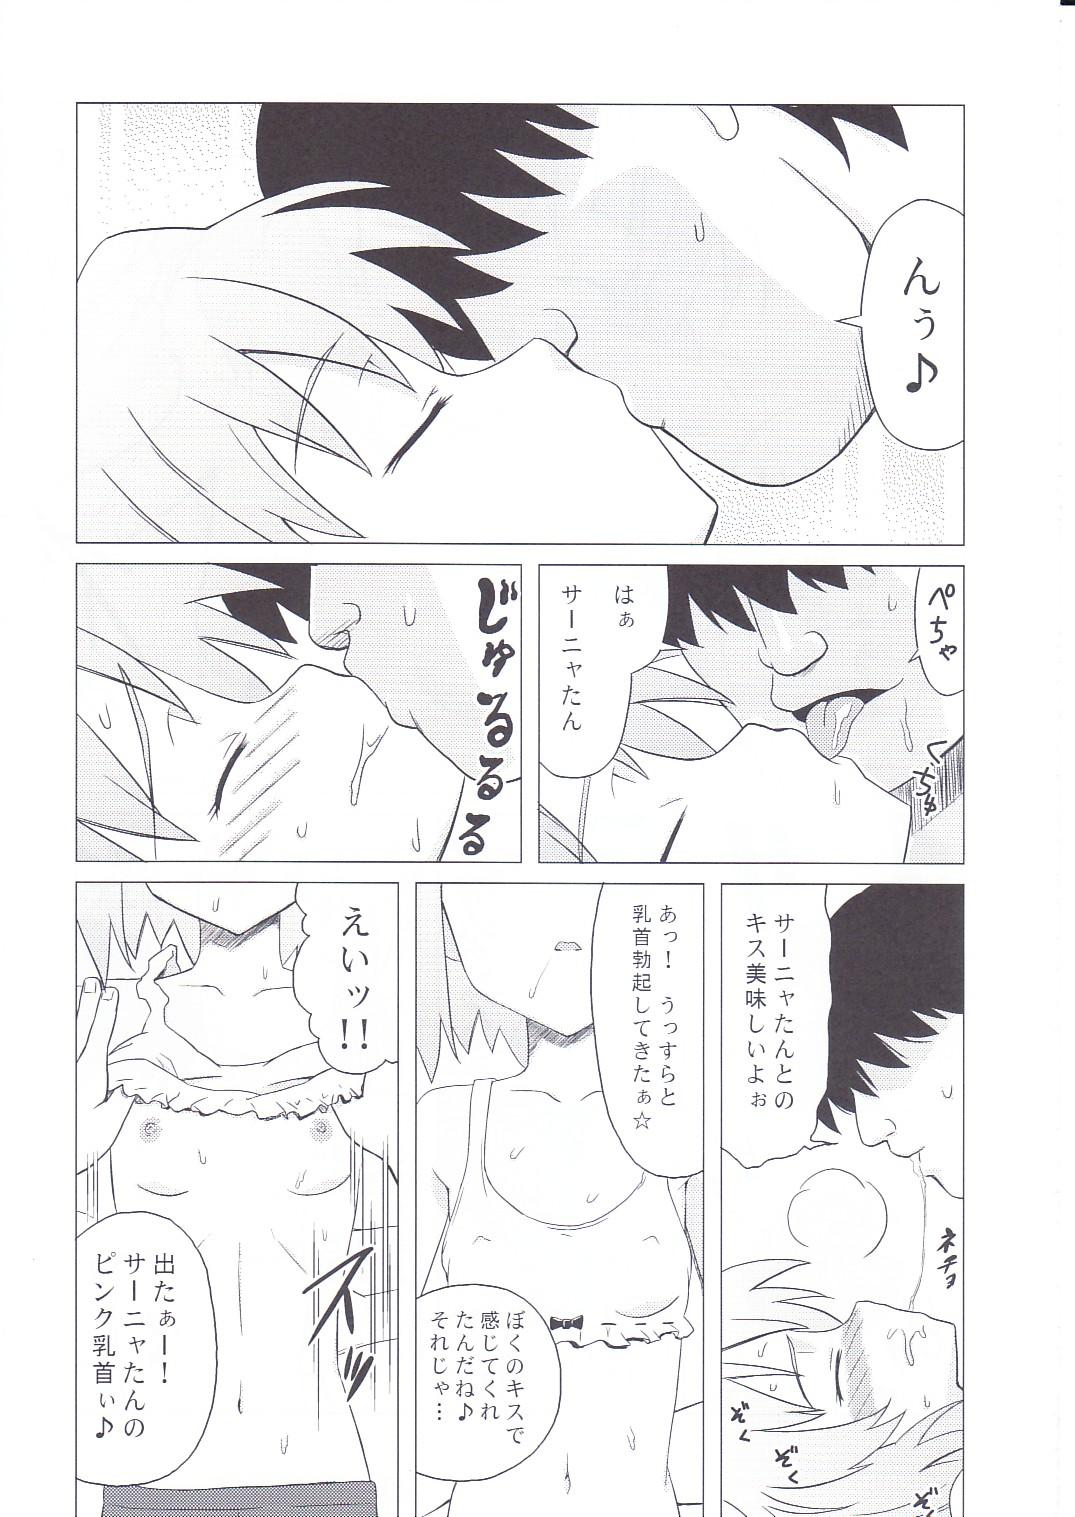 Rica Sleeping witches - Strike witches Blowjob - Page 6